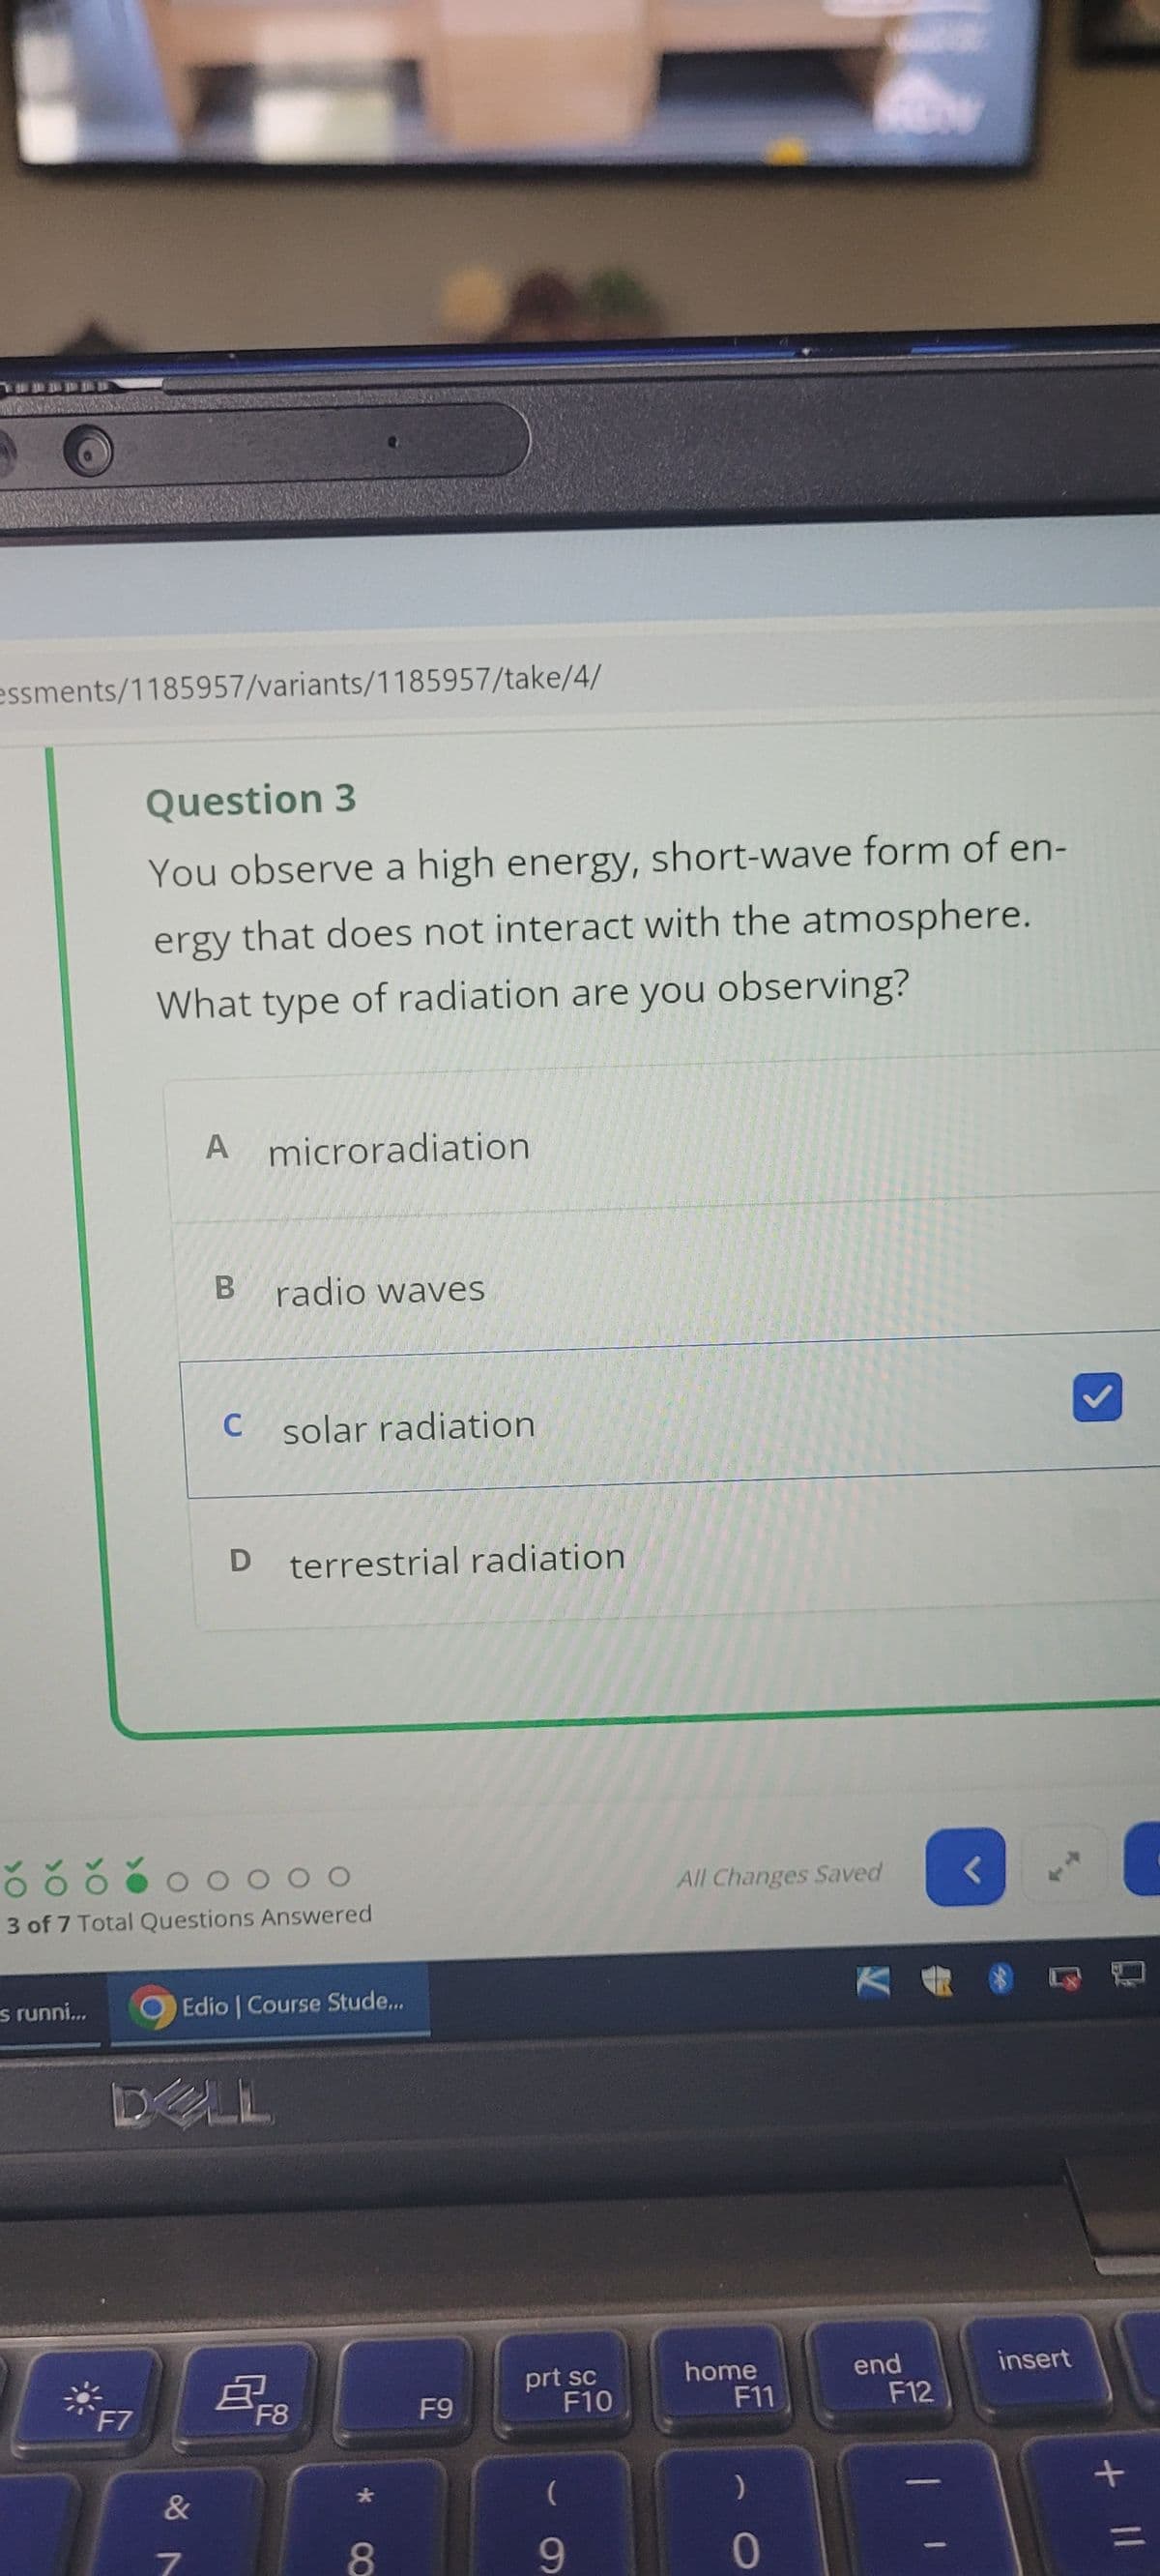 essments/1185957/variants/1185957/take/4/
Question 3
You observe a high energy, short-wave form of en-
ergy that does not interact with the atmosphere.
What type of radiation are you observing?
A microradiation
B radio waves
C solar radiation
D terrestrial radiation
OOOOO
3 of 7 Total Questions Answered
s runni...
Edio | Course Stude...
DLL
All Changes Saved
く
F7
F8
F9
prt sc
F10
home
F11
end
insert
F12
&7
*
(
8
9
0
+ ||
=